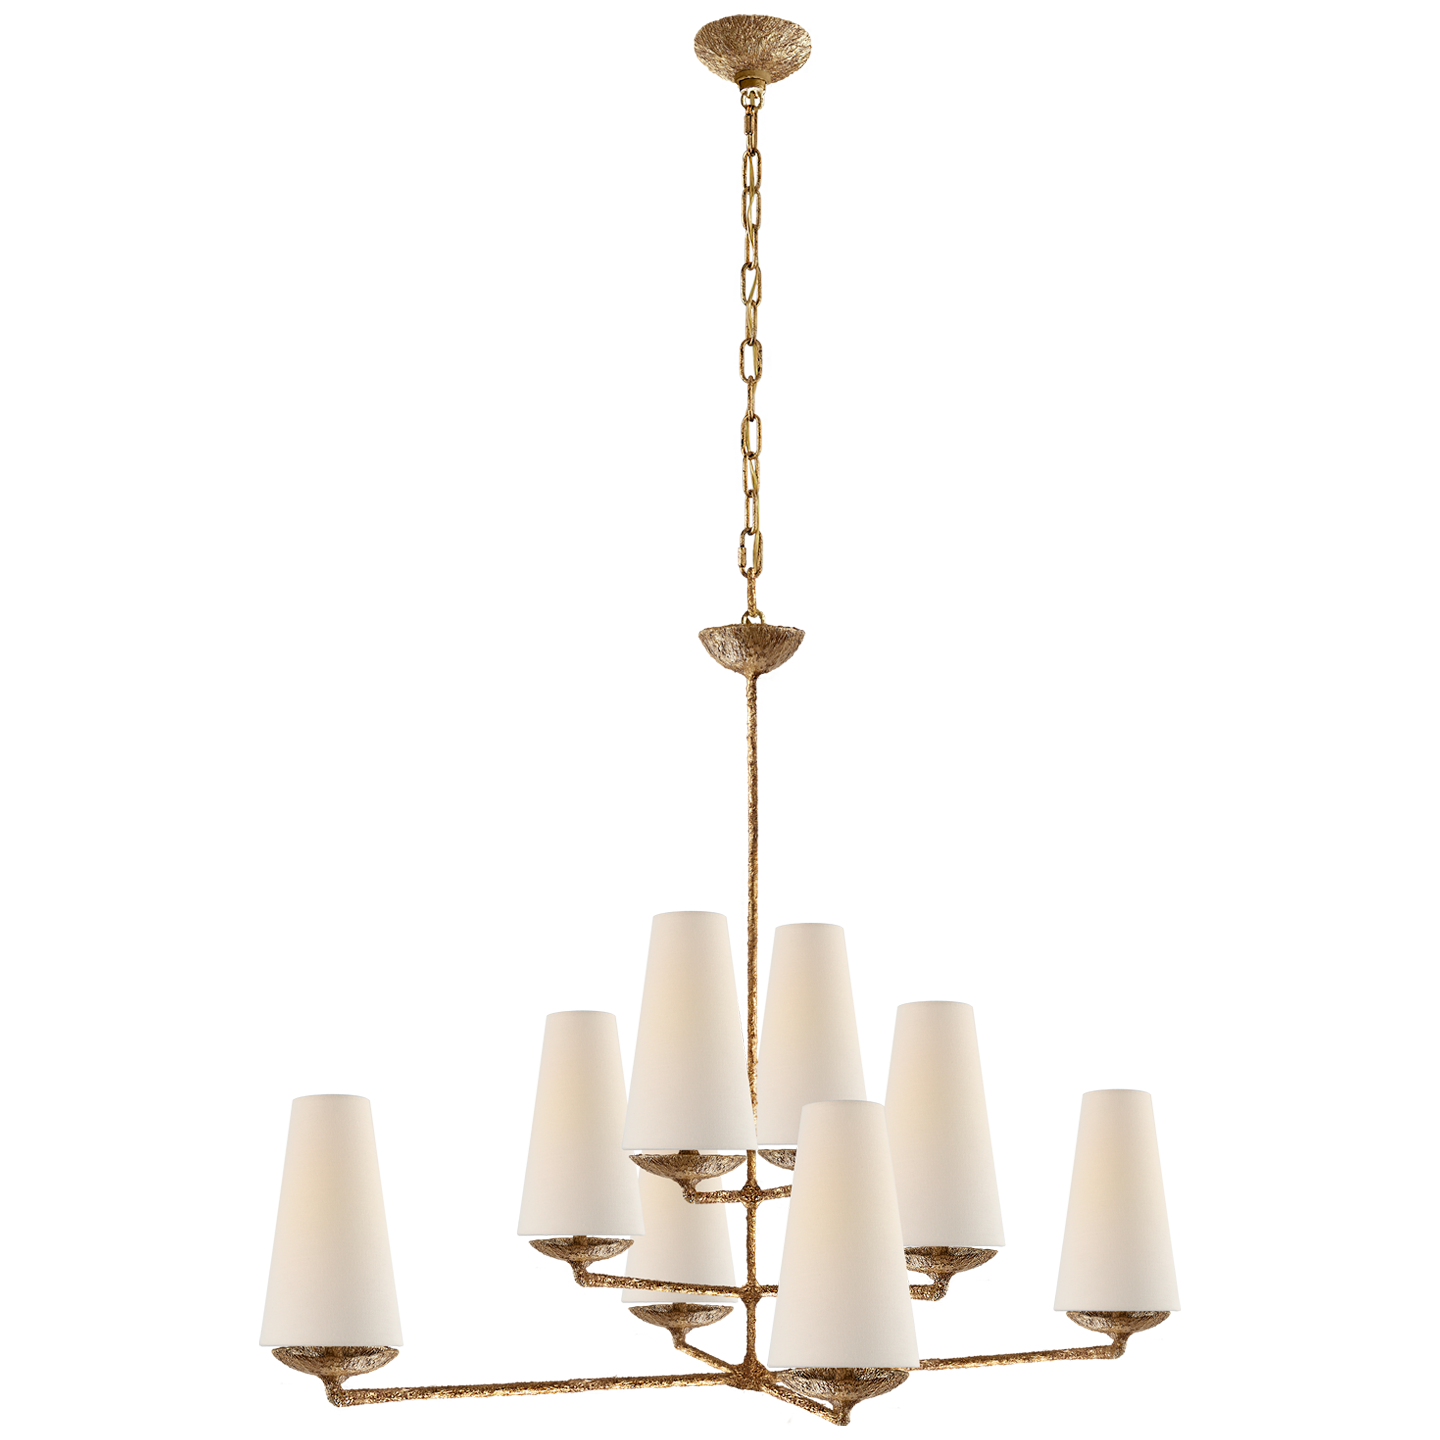 The Fontaine Large Offset Chandelier by Visual Comfort has a slim cross section at the bottom matched with offset layers of linen shades. This is a gorgeous piece to add to any dining room, living room, or other large area  Designer: AERIN